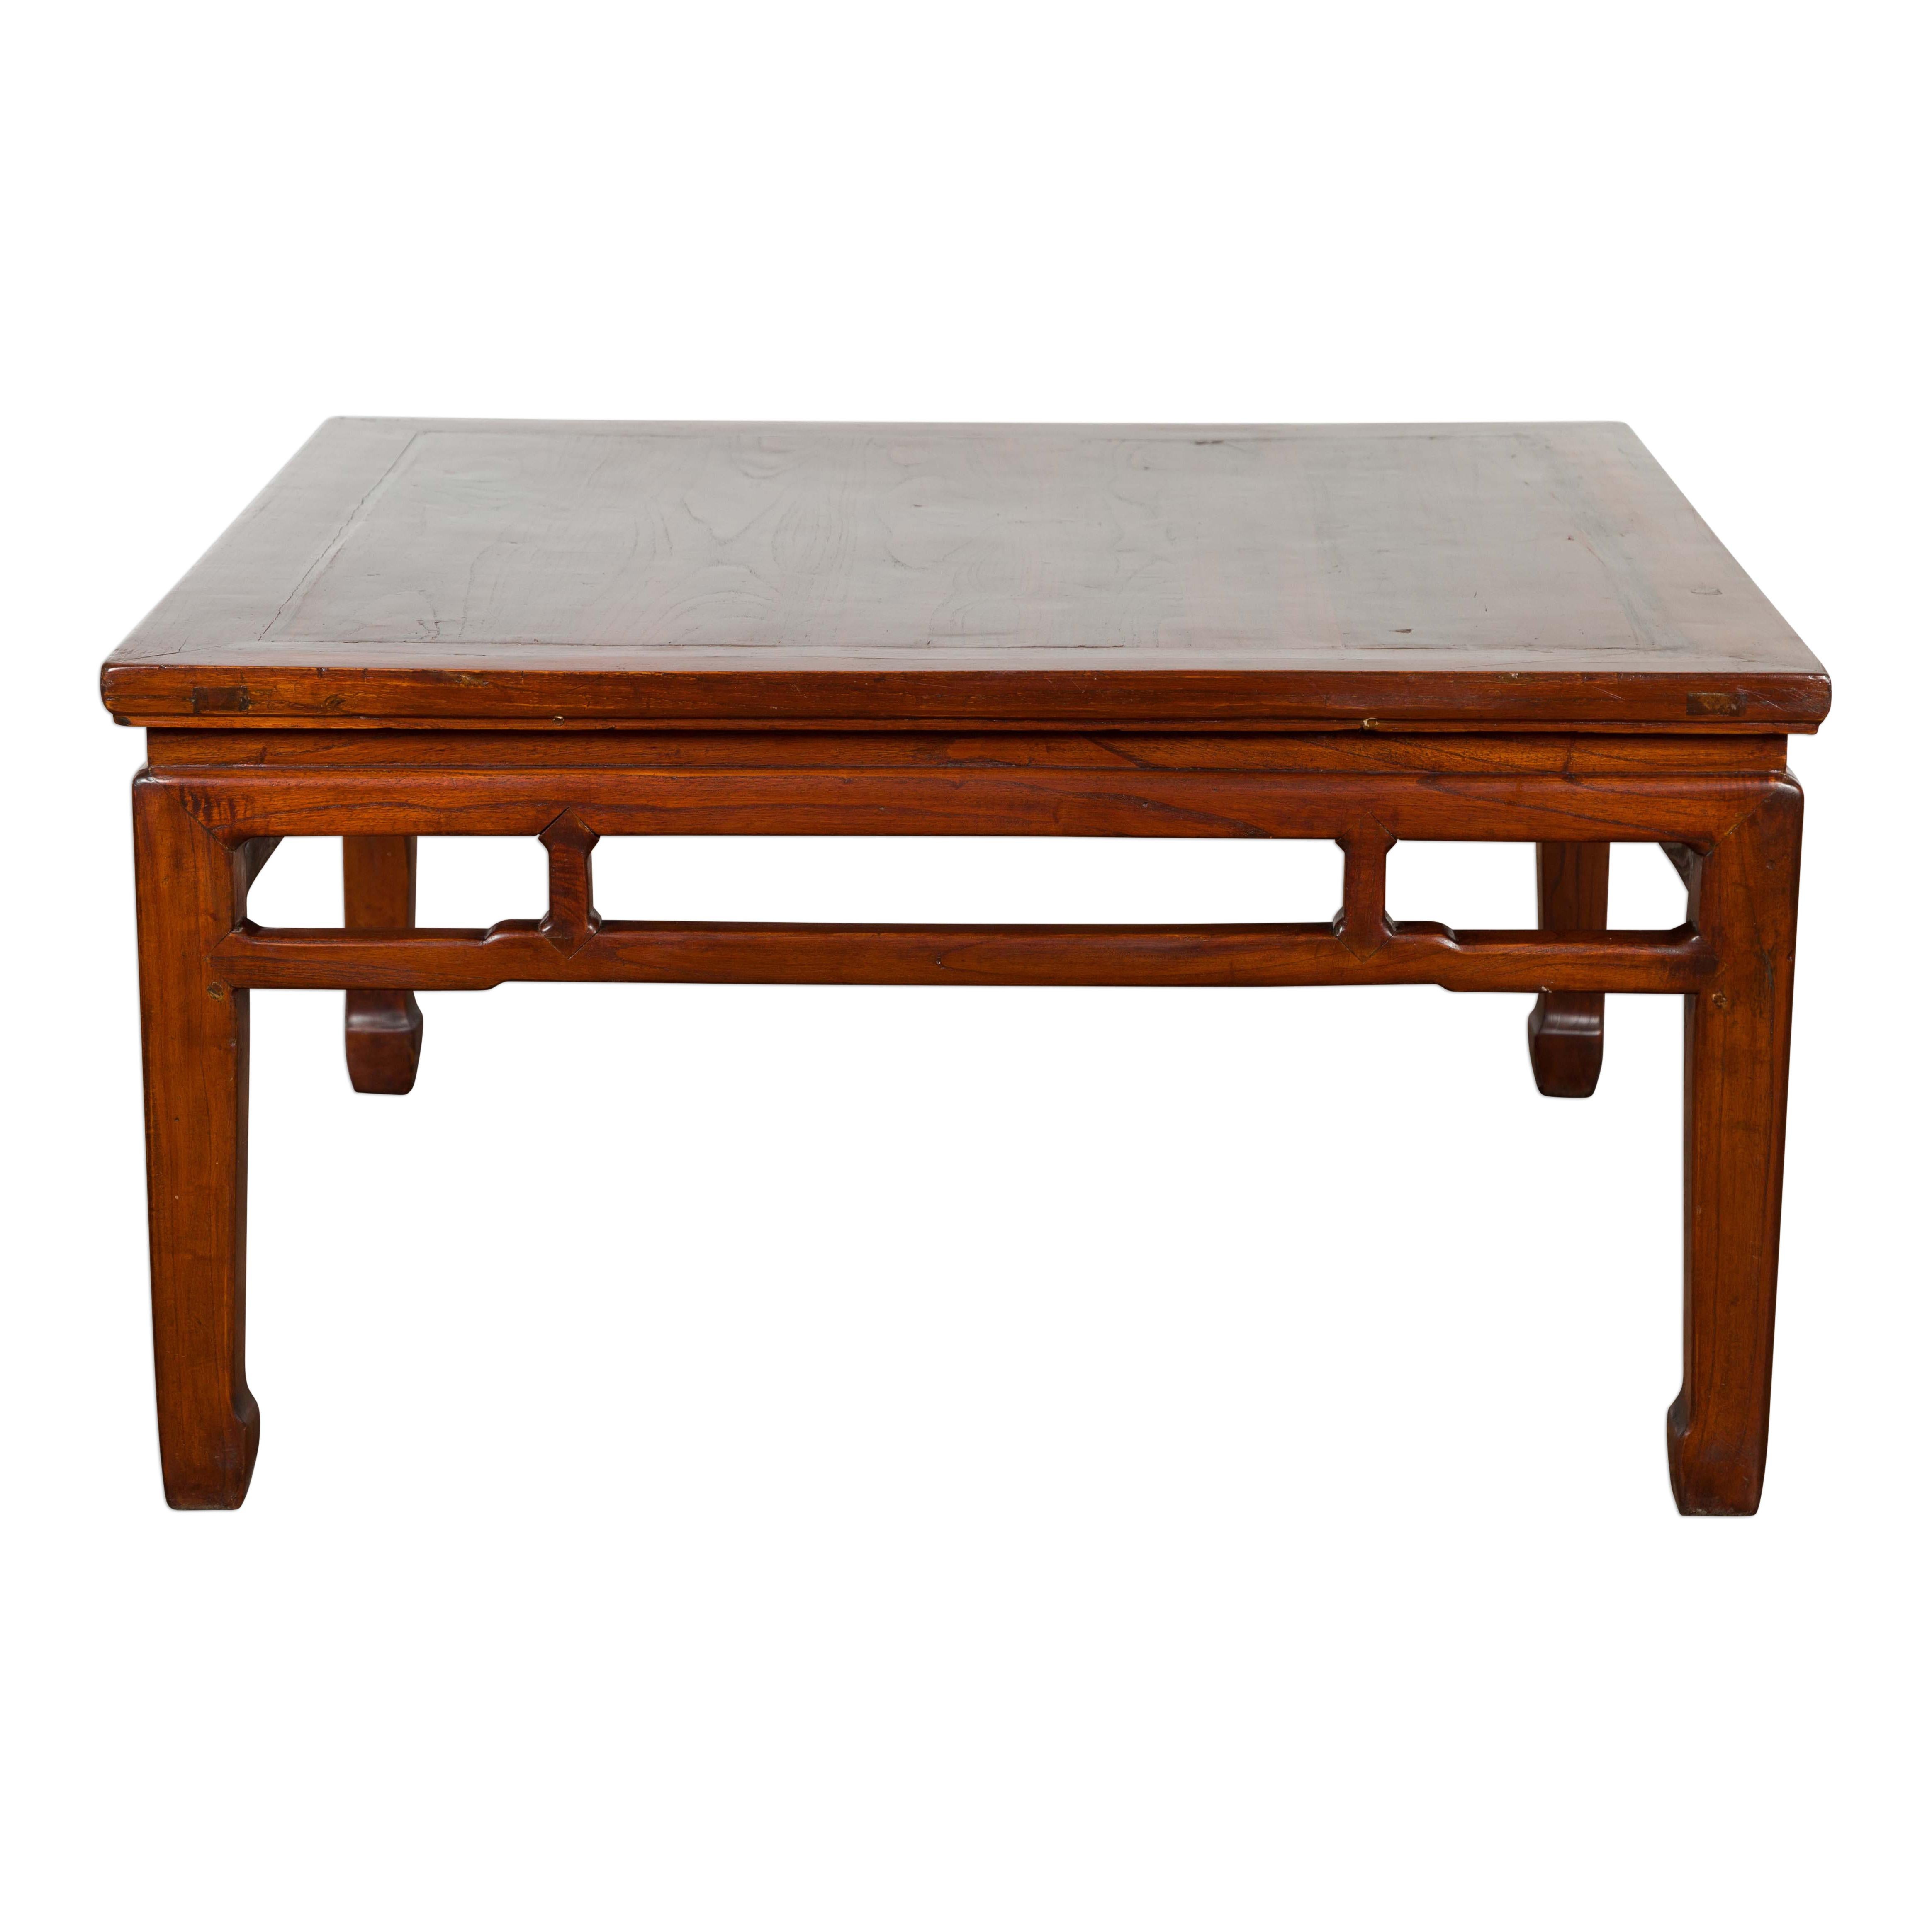 Rich Brown Square Shaped Coffee Table with Spacious Top For Sale 10